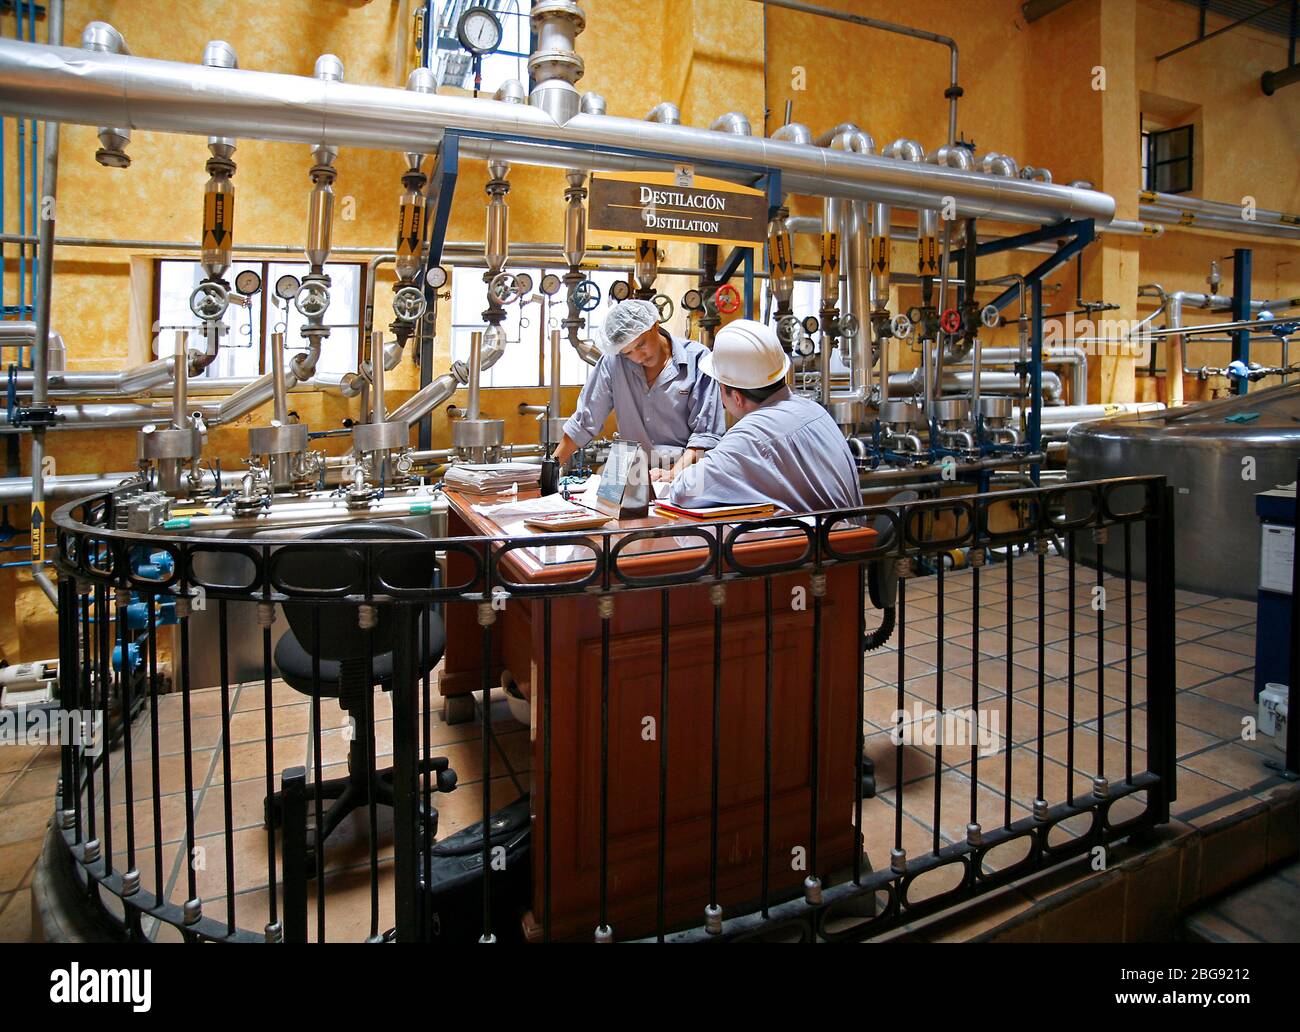 Workers in Jose Cuervo distillery, Tequila, Mexico Stock Photo